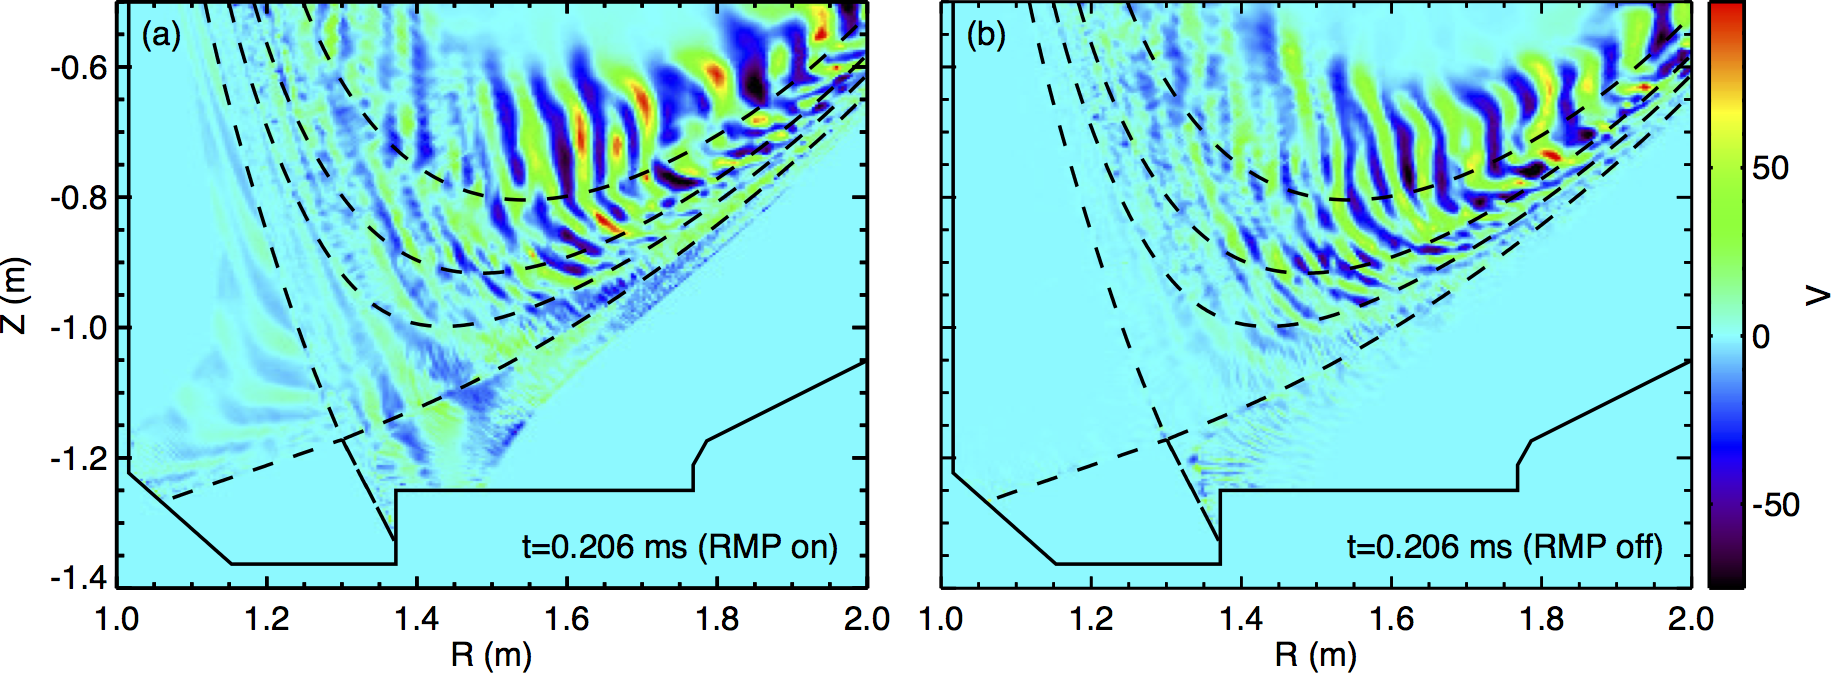 RMS amplitude of the electrostatic potential fluctuations (a) with RMPs and (b) without RMPs. The dashed lines indicate the flux-surfaces $\psi_N=0.8$, 0.9, 0.95 and 1.0.